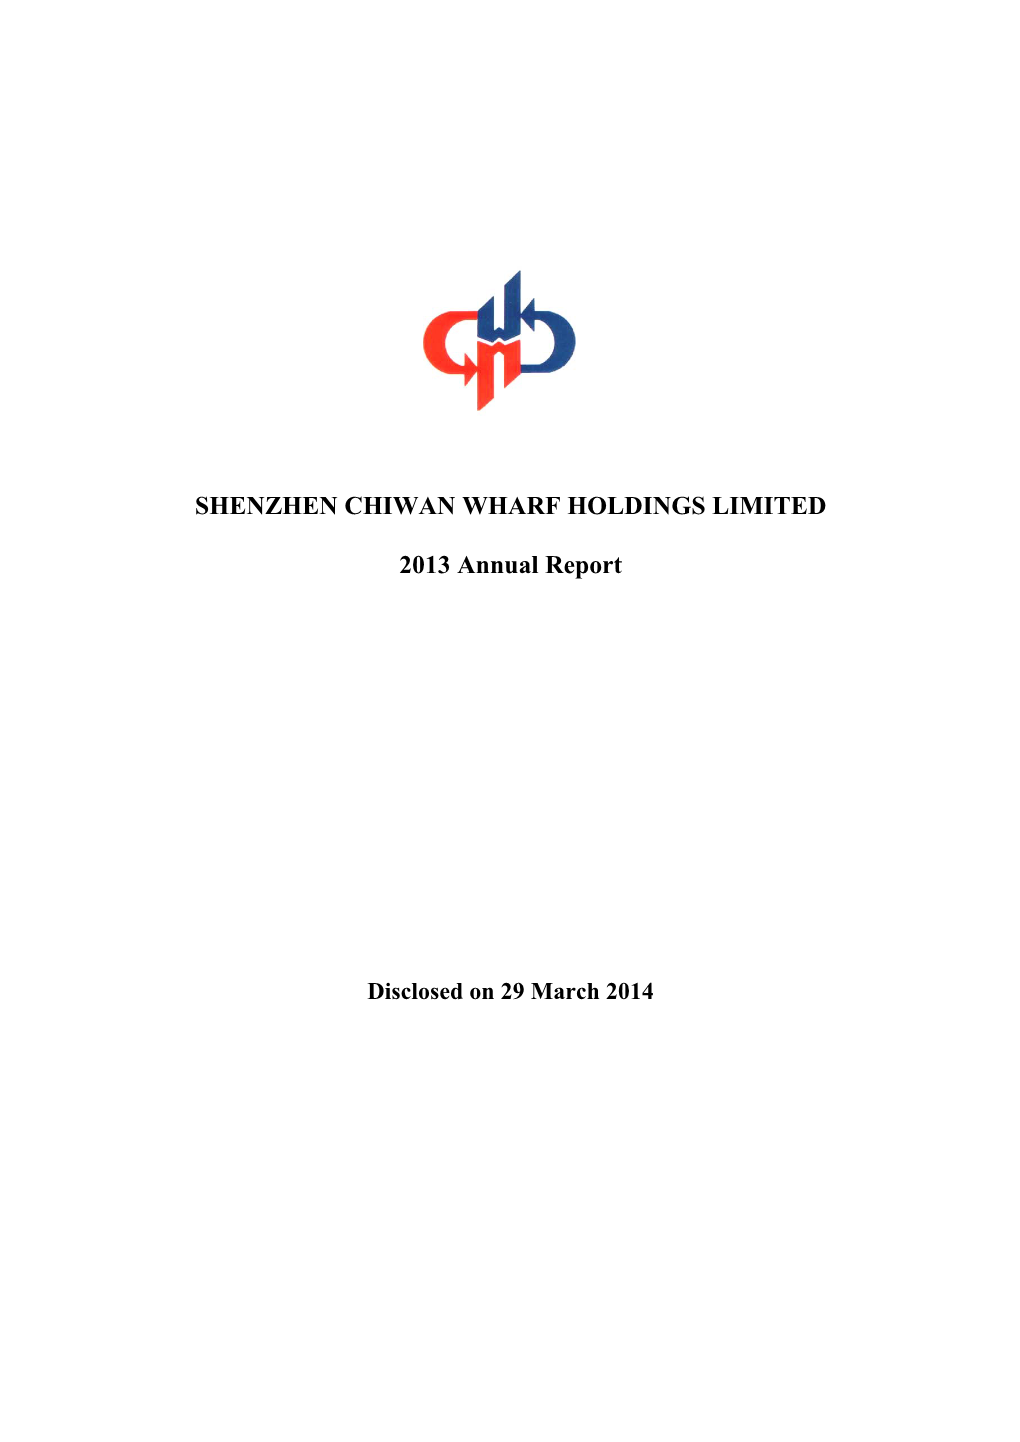 SHENZHEN CHIWAN WHARF HOLDINGS LIMITED 2013 Annual